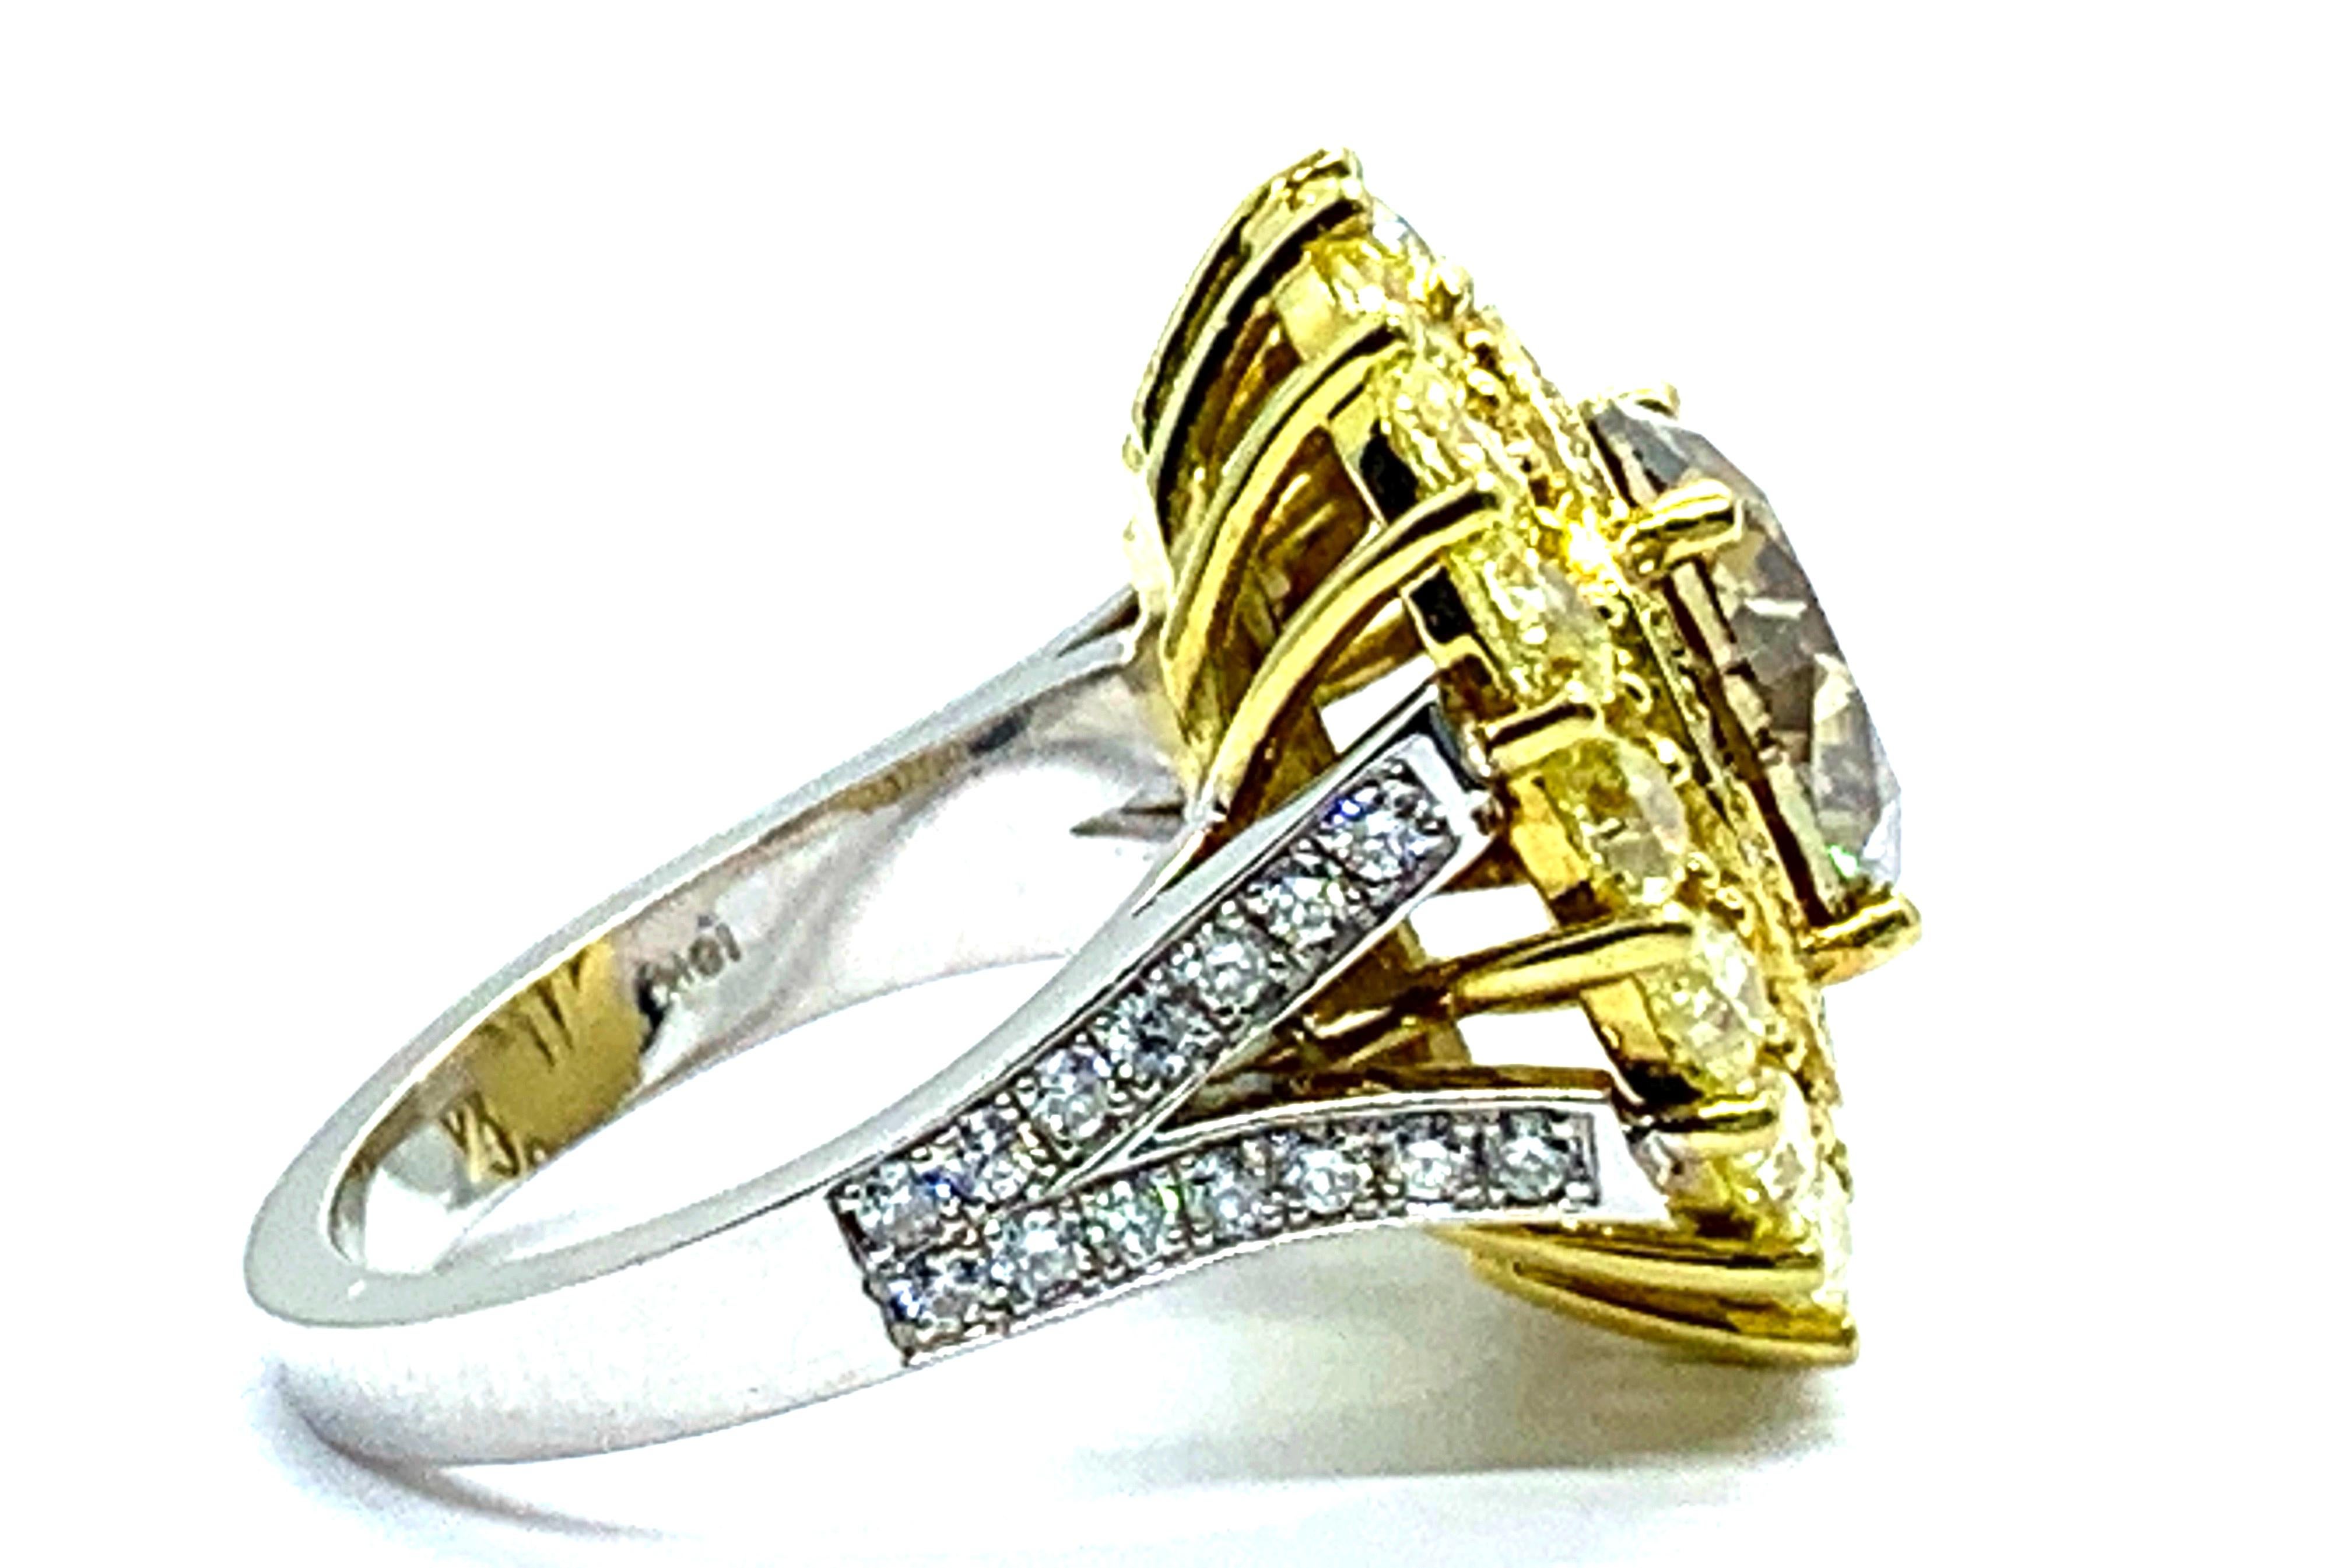 4 Carat Weight Round Champagne Ring
I1
9.9 mm
52 Rounds
E-F  VS
Approximately 3/4 Carat Weight
18 Pear Shape
Fancy Yellow   VS
Approximately 2 Total Carat Weight 
18k White Gold
Total Carat Weight is 6.75 Carats
Size 6 1/2


 


